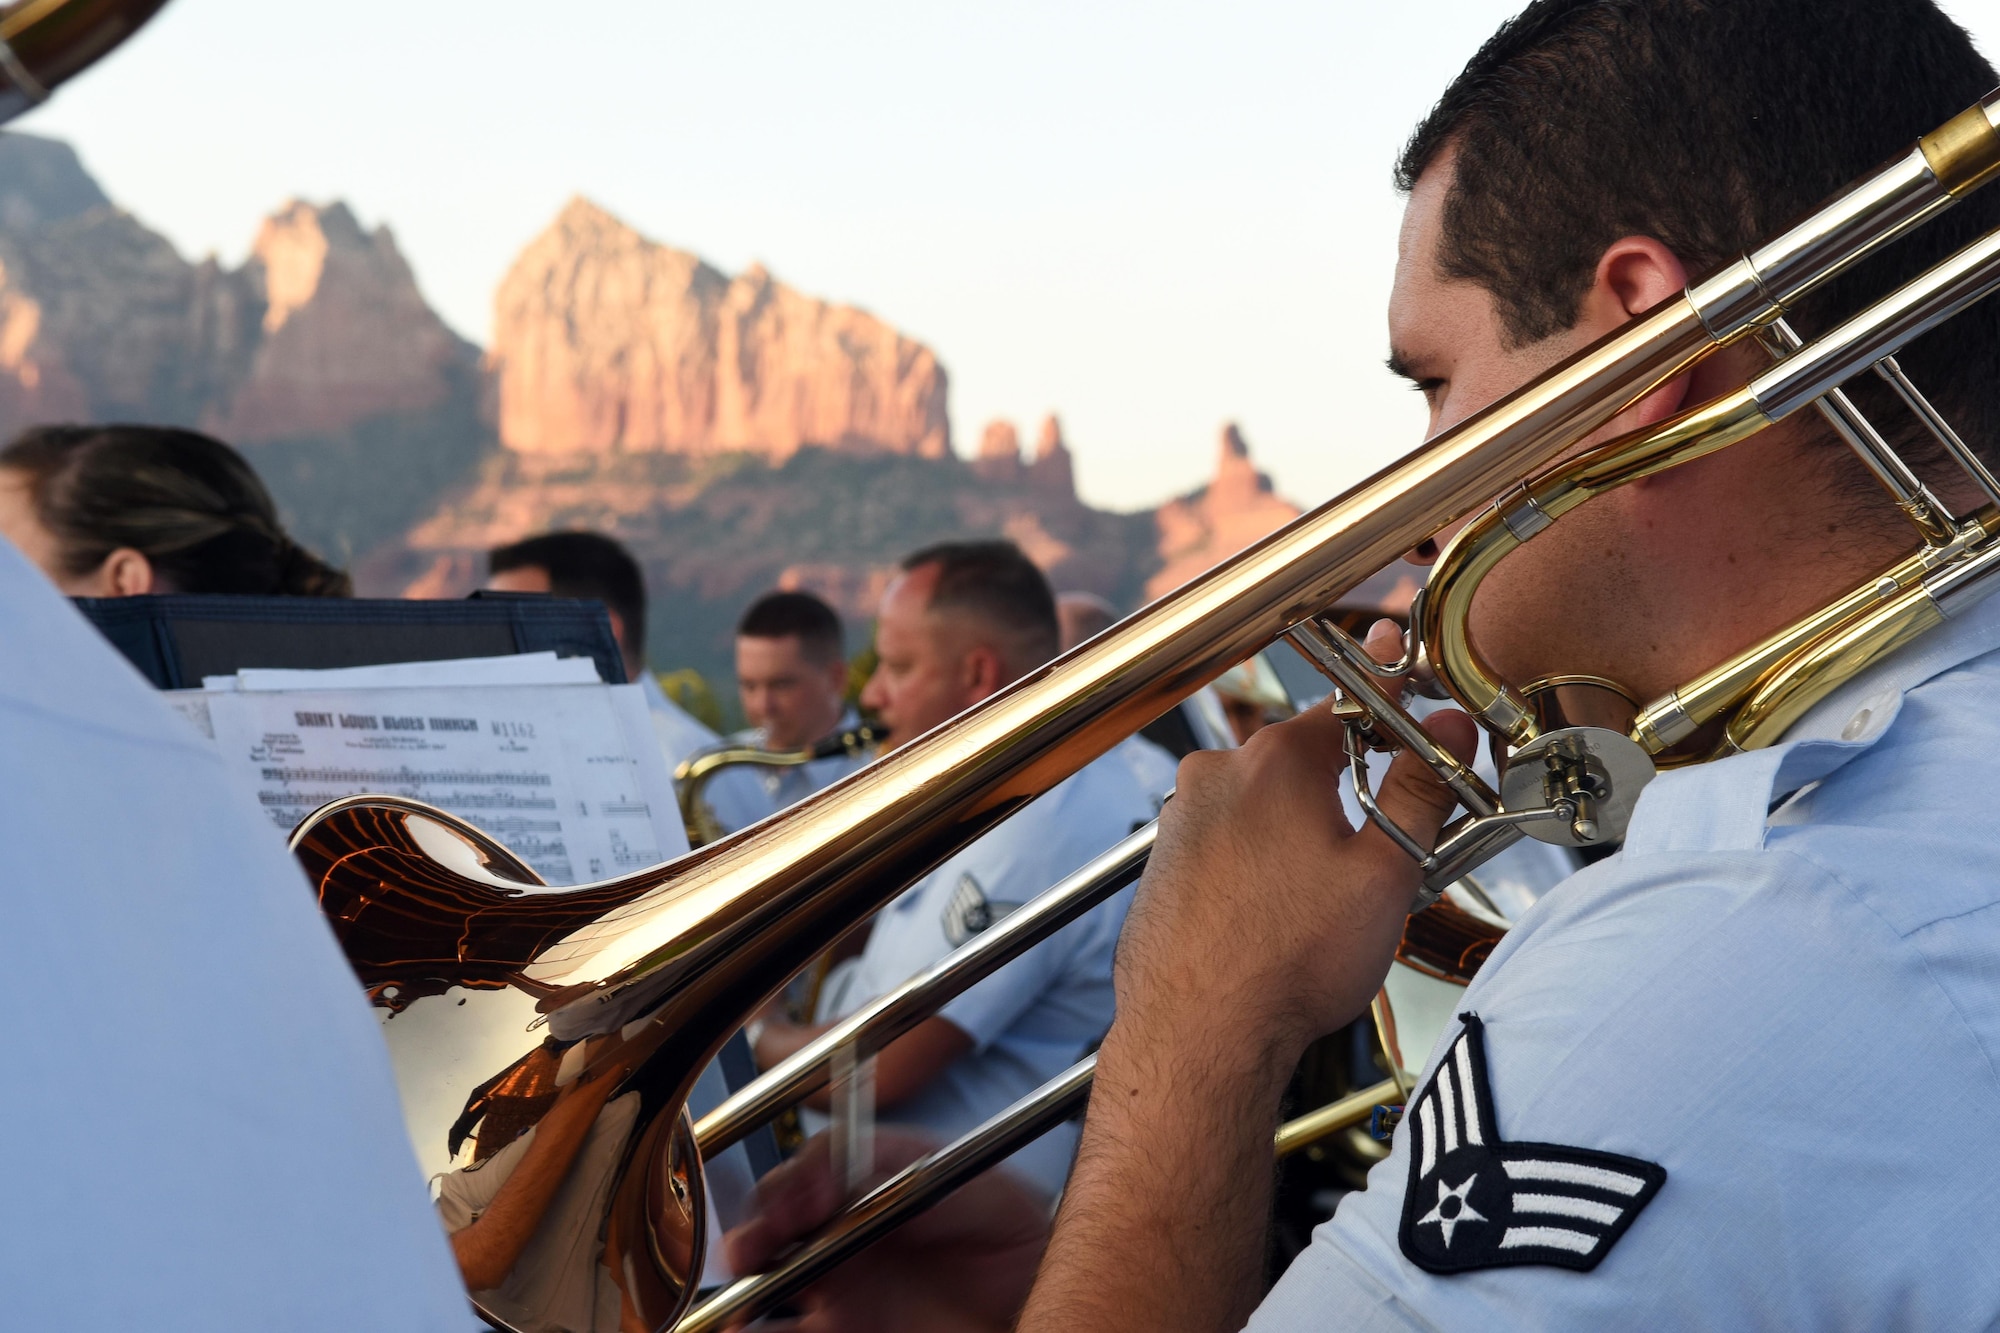 Senior Airman Larry Wiss, Band of the Southwest instrumentalist, plays an encore performance of "Saint Louis Blues March" after a performance June 29 in Sedona, NM. The performance featured music from other American composers, Hollywood legends, and well-known blockbusters. (Texas Air National Guard photo by Staff Sgt. Kristina Overton)